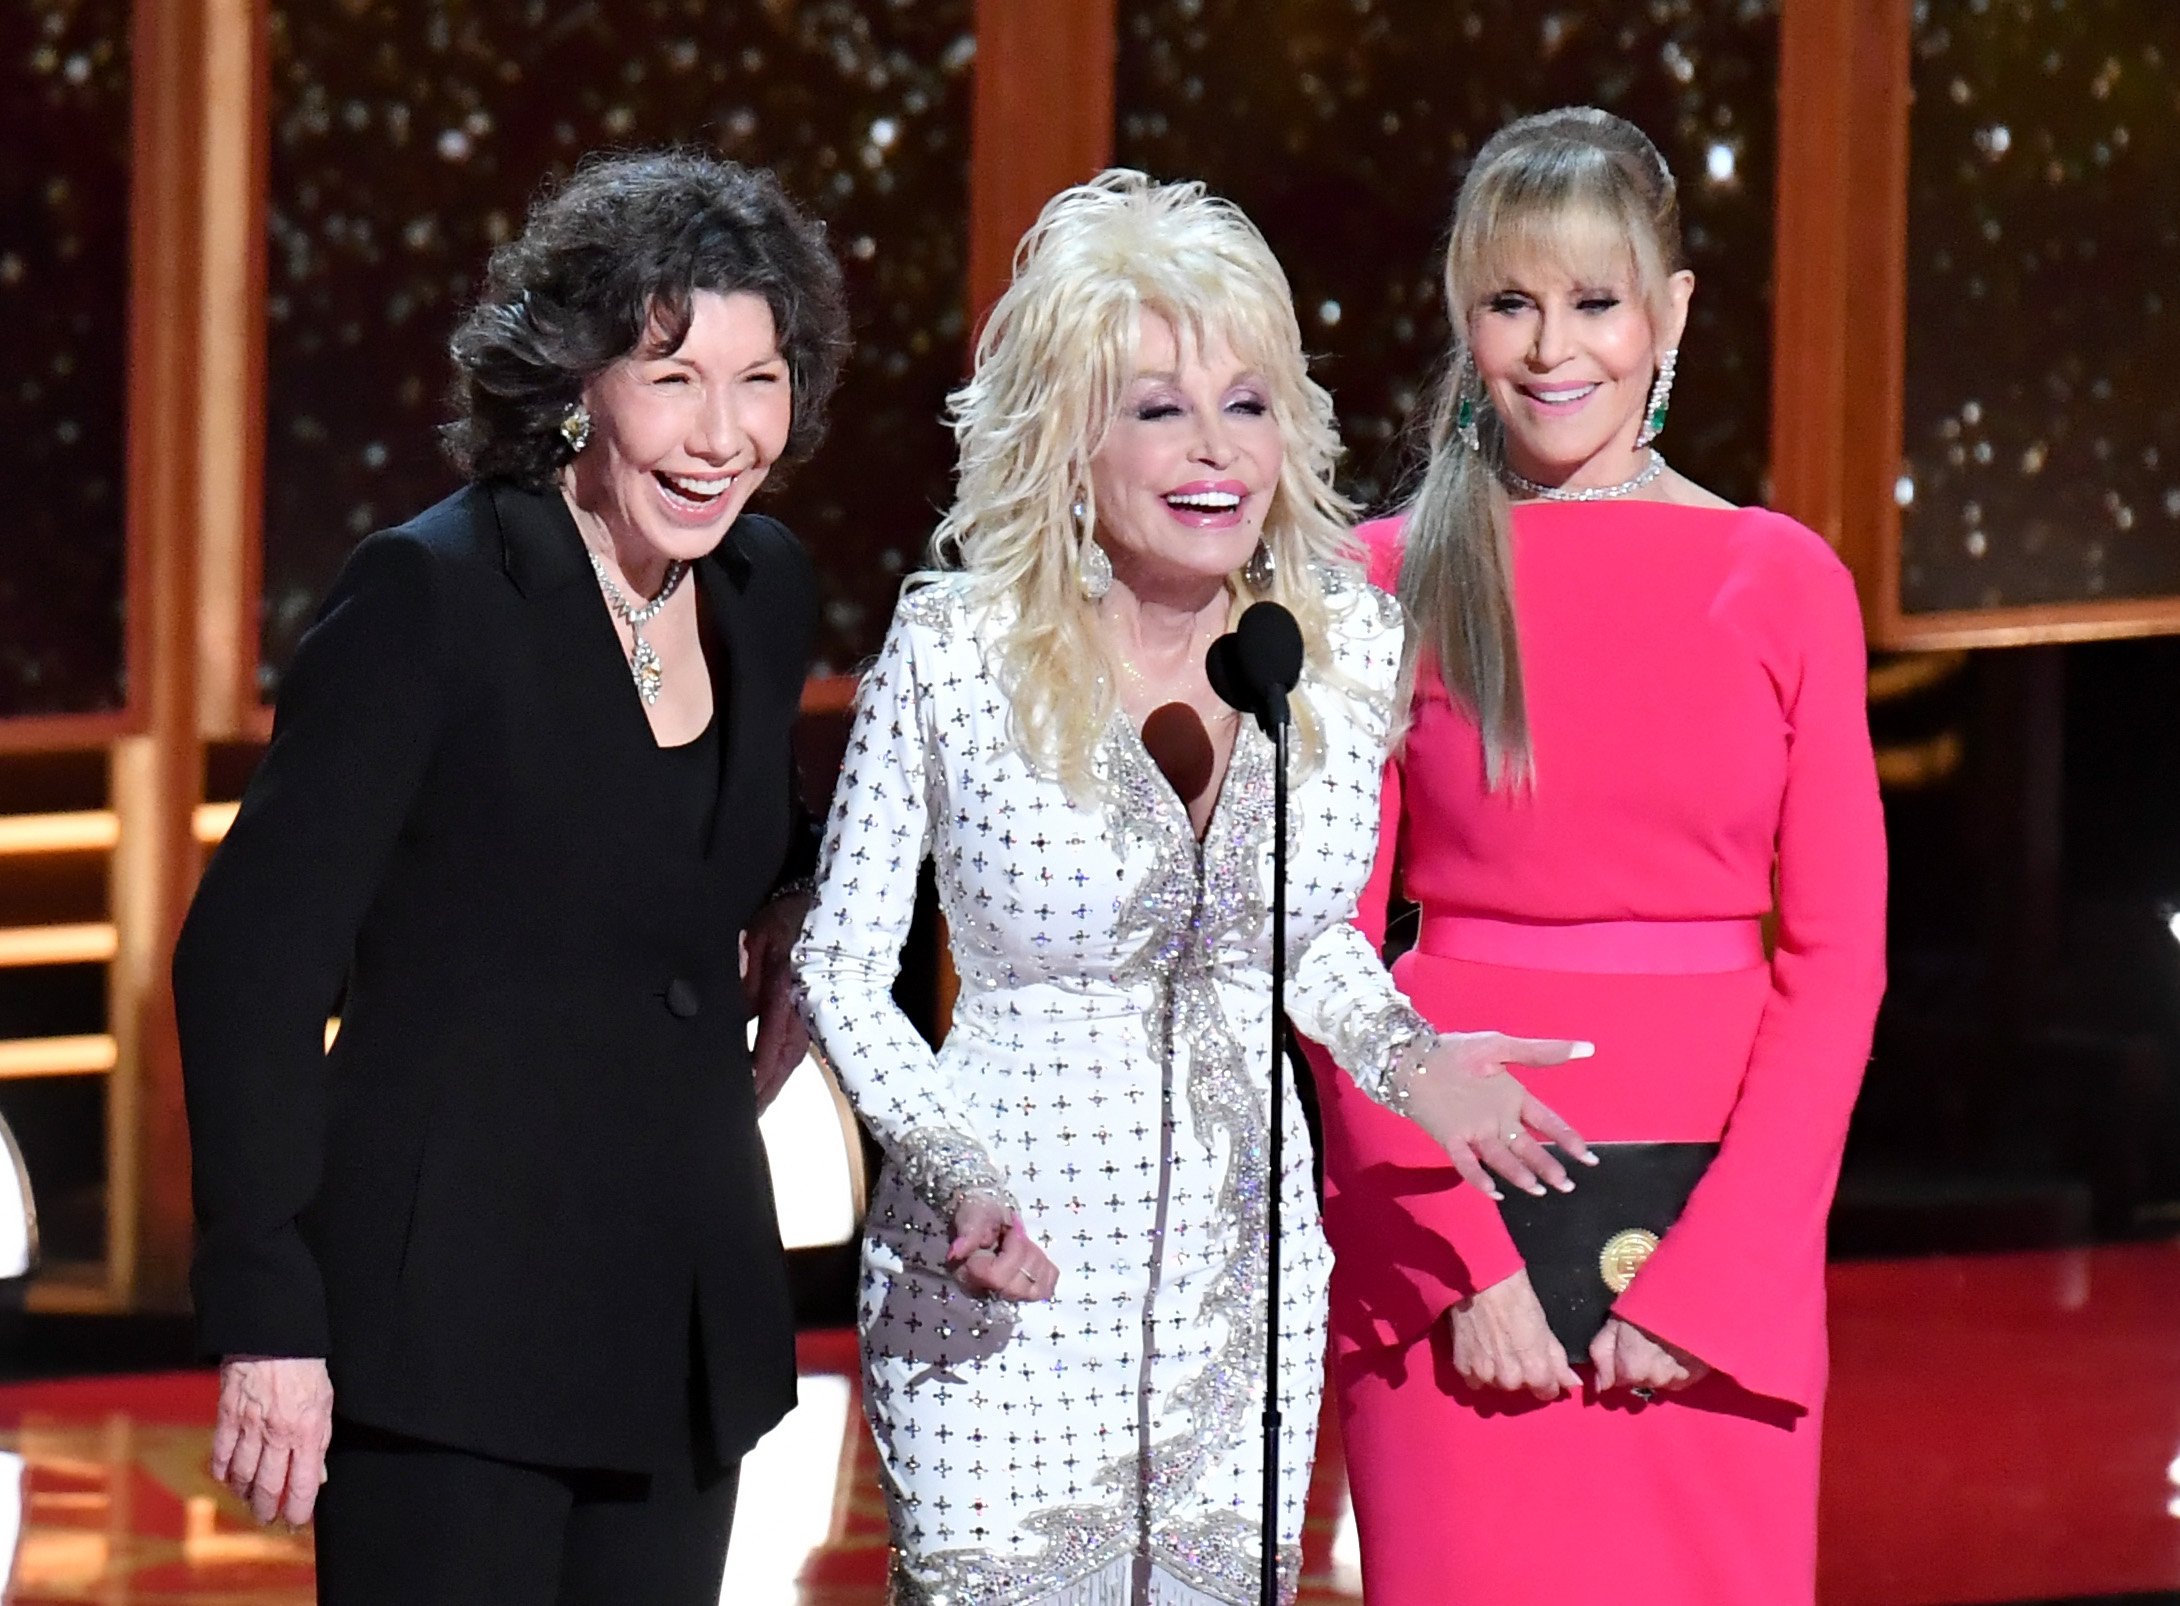 Grace and Frankie stars Jane Fonda and Lily Tomlin beside Dolly Parton speak onstage during the 69th annual Emmy Awards.